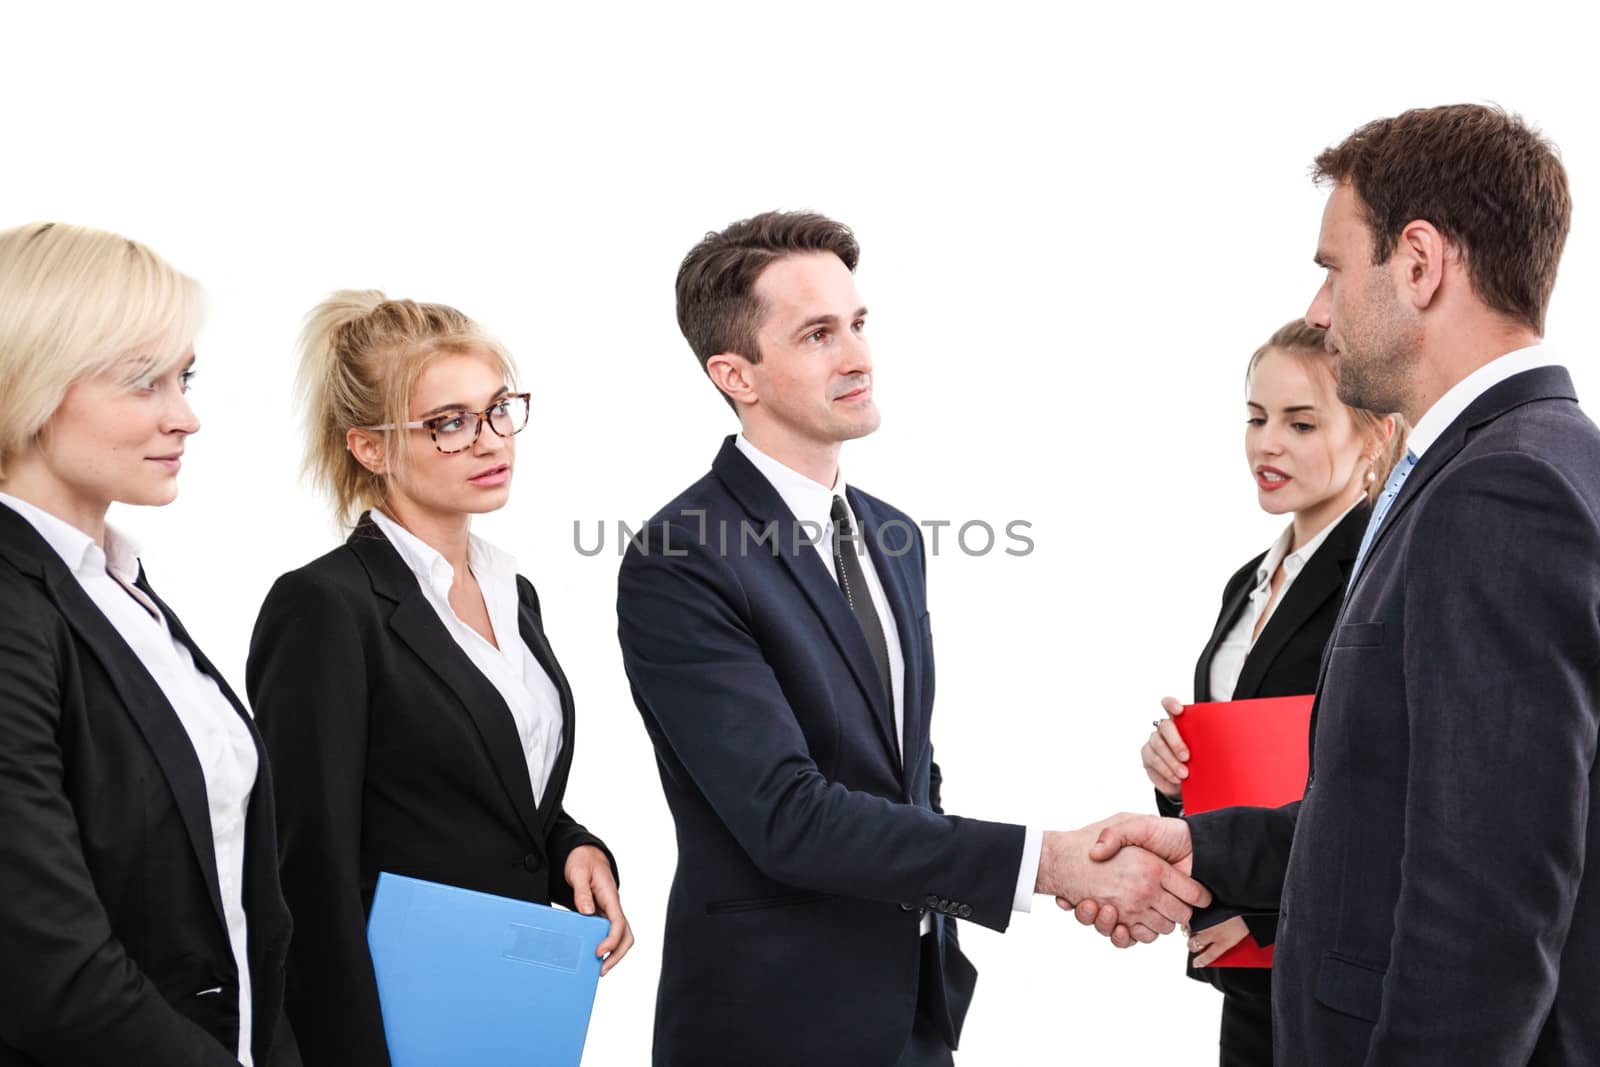 Business people shaking hands, finishing up a meeting, isolated on white background